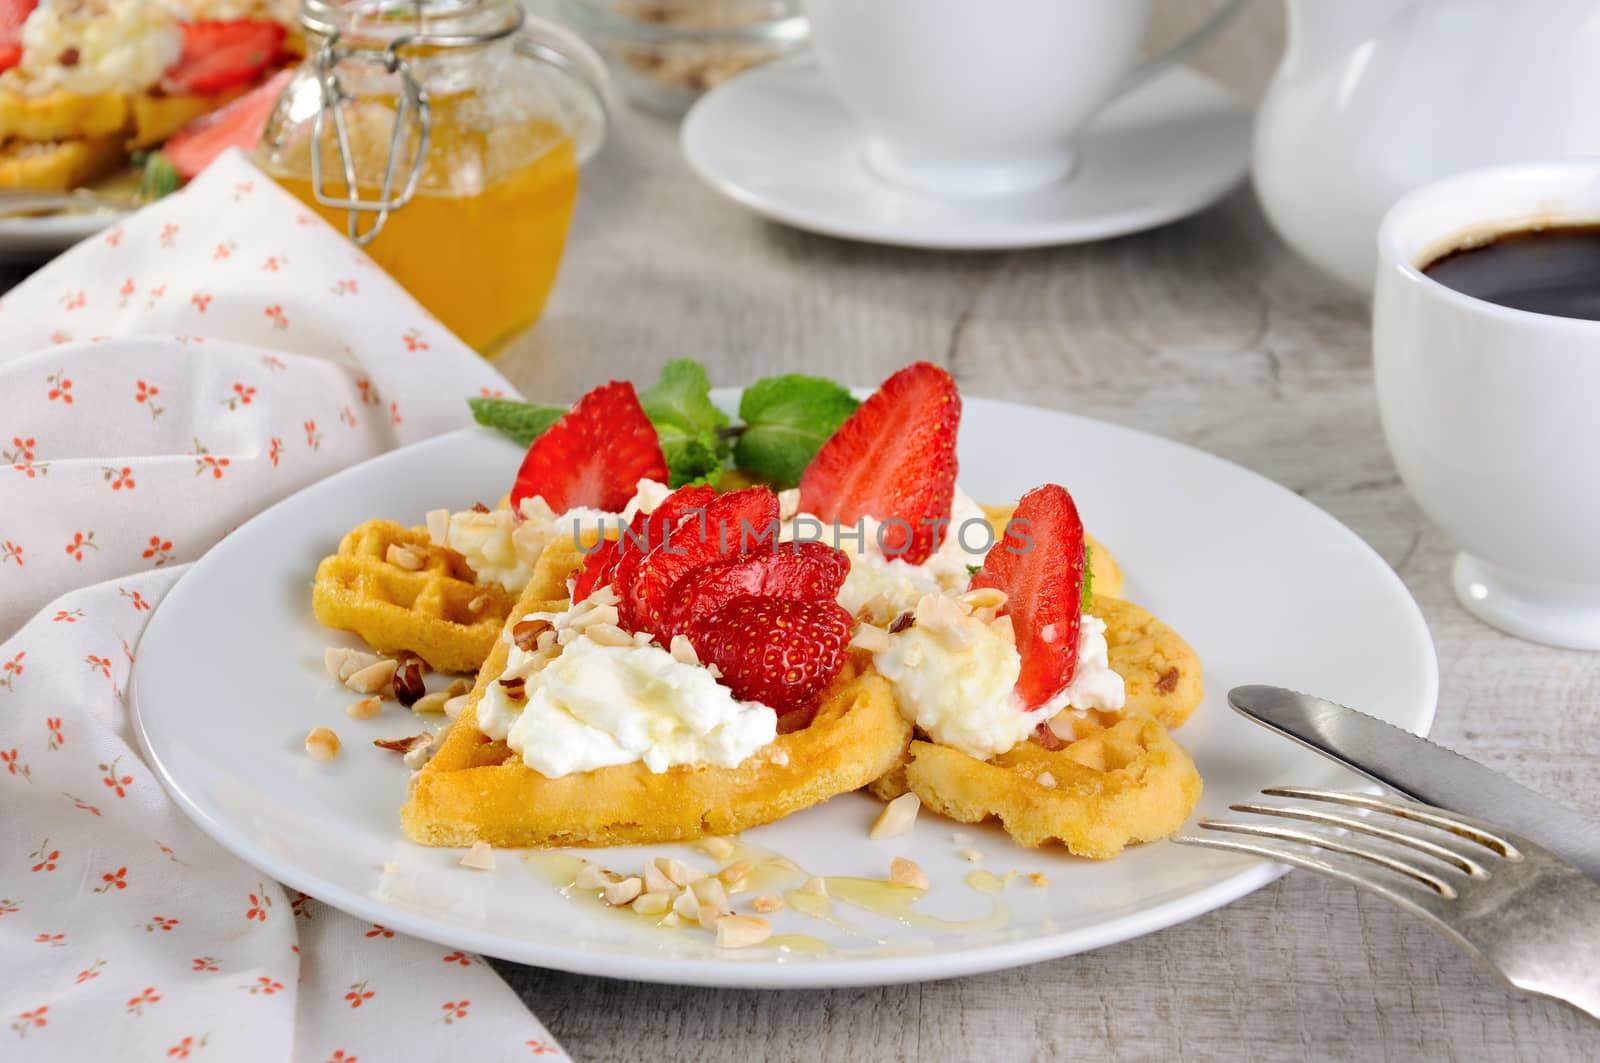  Delicate, melting  mouth-watering  Belgian waffles with whipped cream, strawberries, flavored with peanuts and honey. What could be better for breakfast.